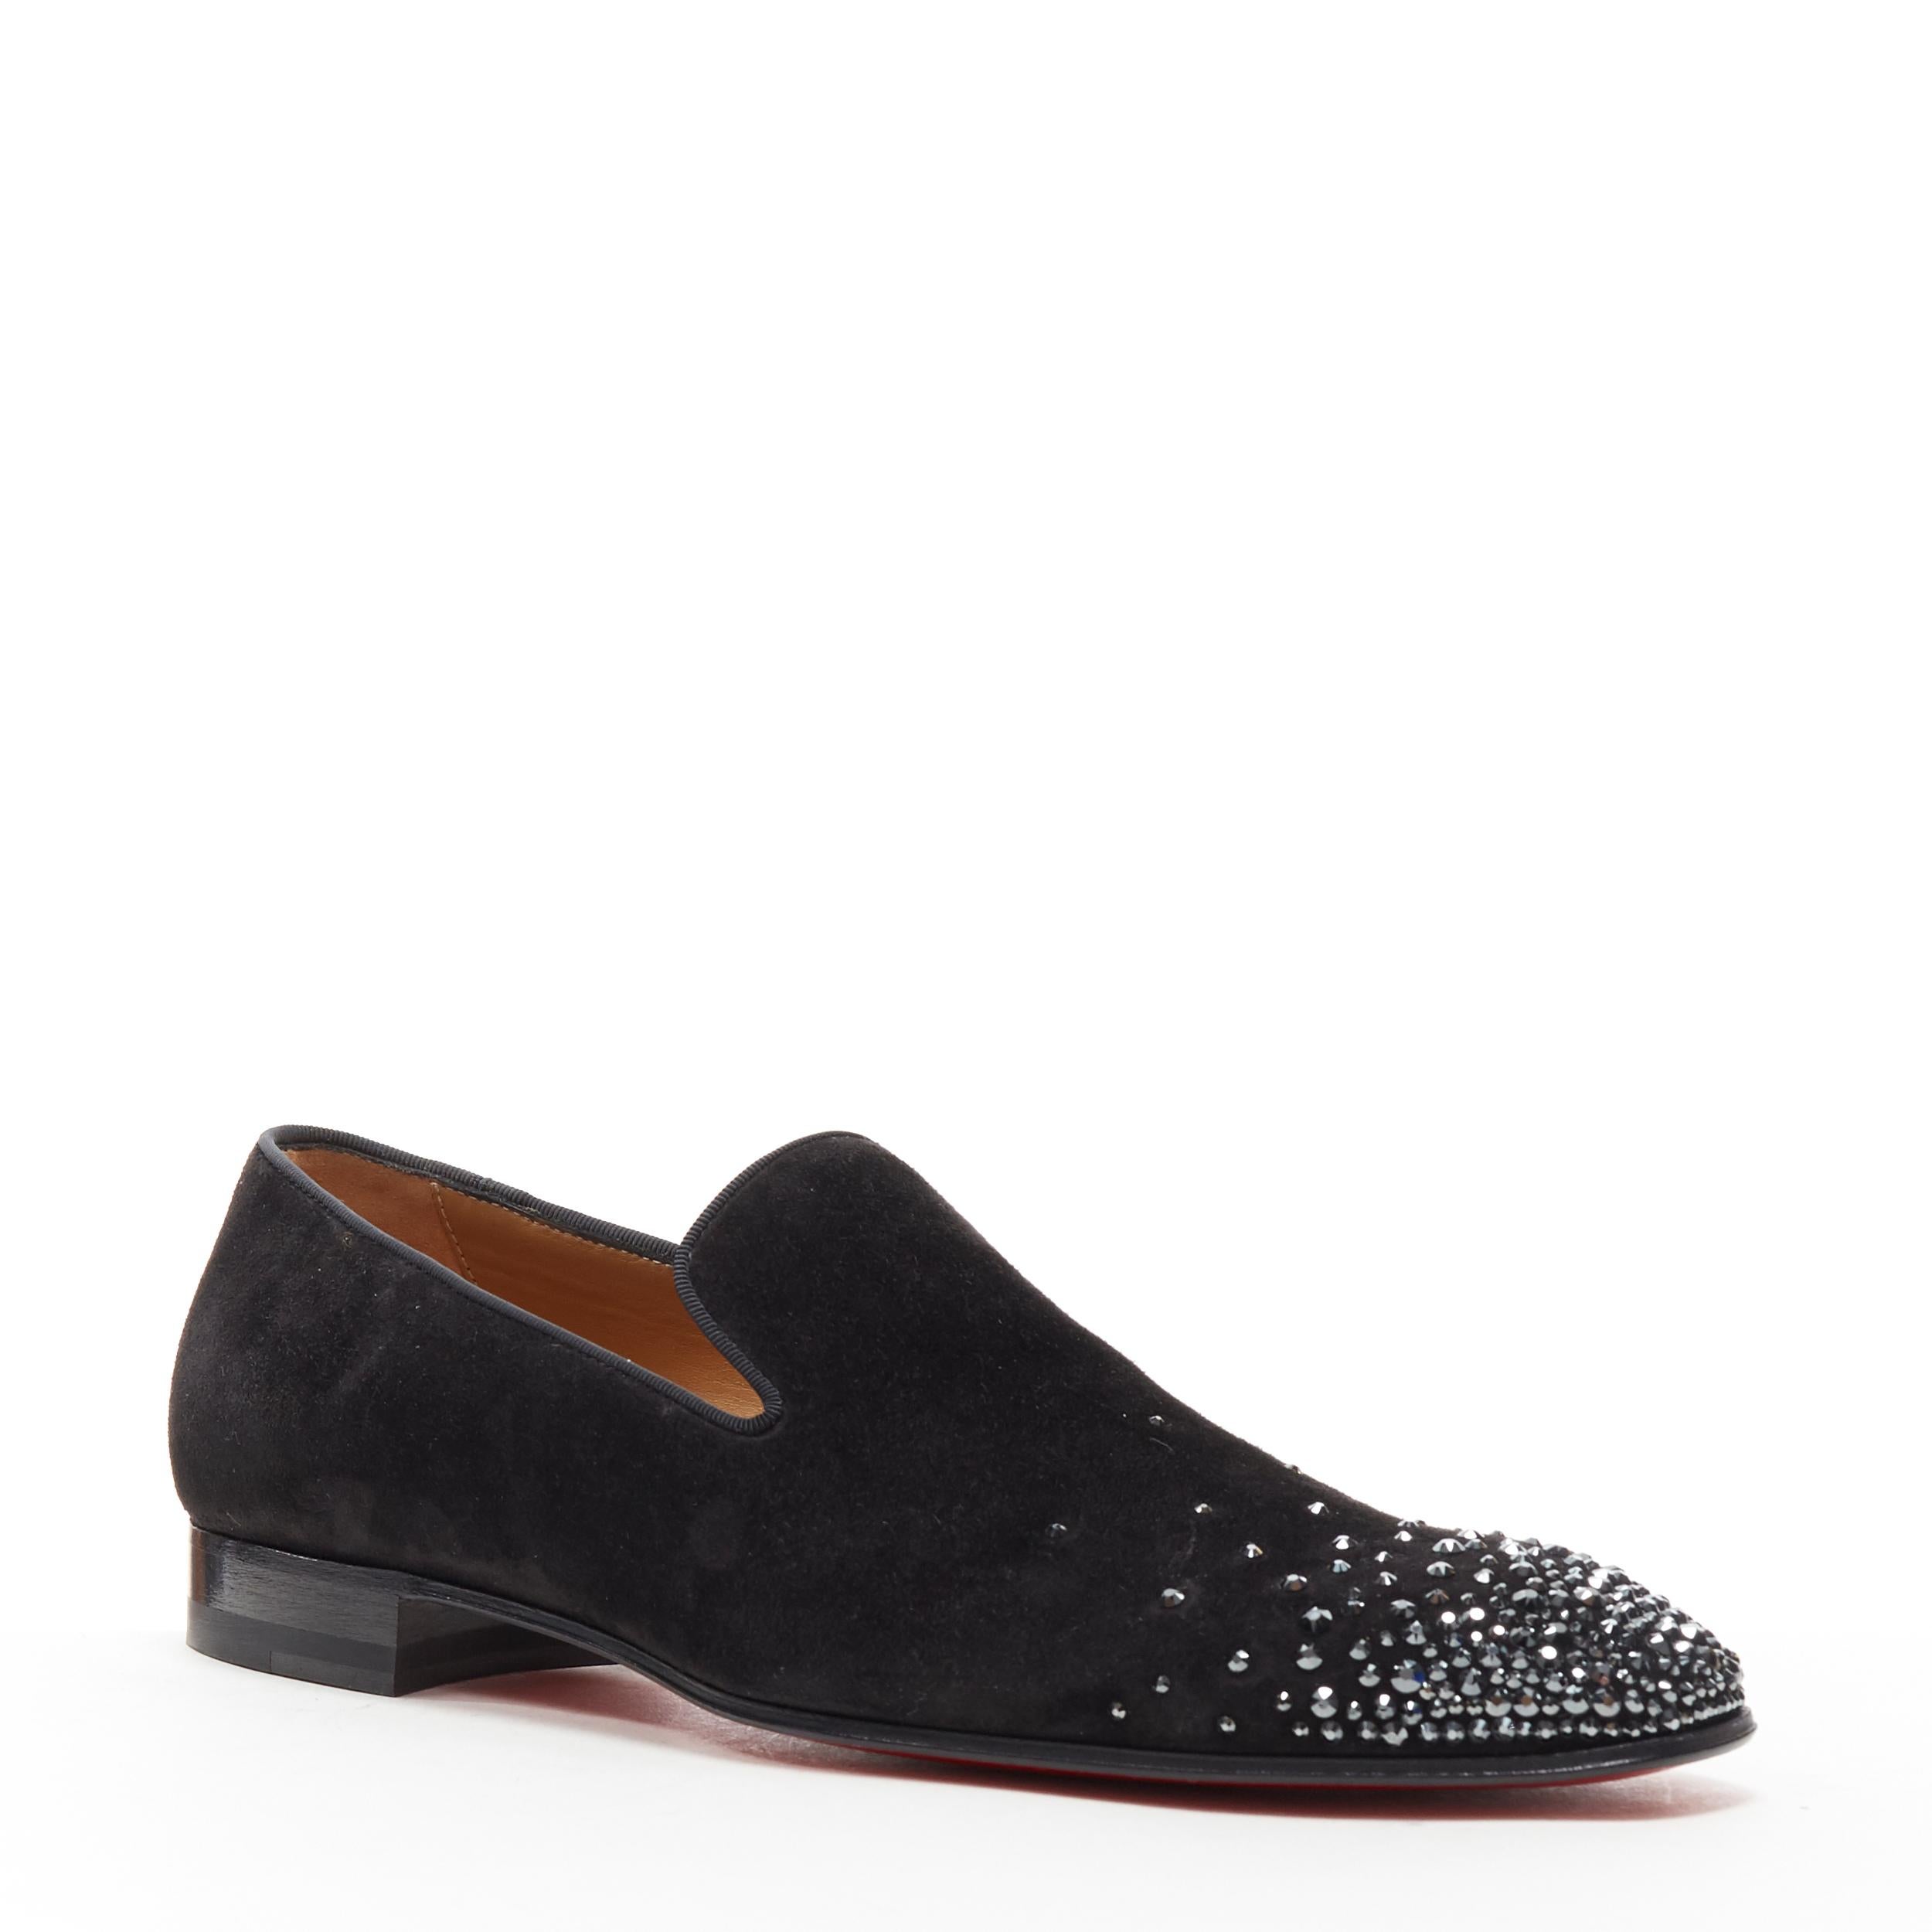 new CHRISTIAN LOUBOUTIN Dandelion Degra Strass toe black suede loafer EU39.5
Brand: Christian Louboutin
Designer: Christian Louboutin
Model Name / Style: Dandelion Strass
Material: Suede
Color: Black
Pattern: Solid
Closure: Slip on
Extra Detail: